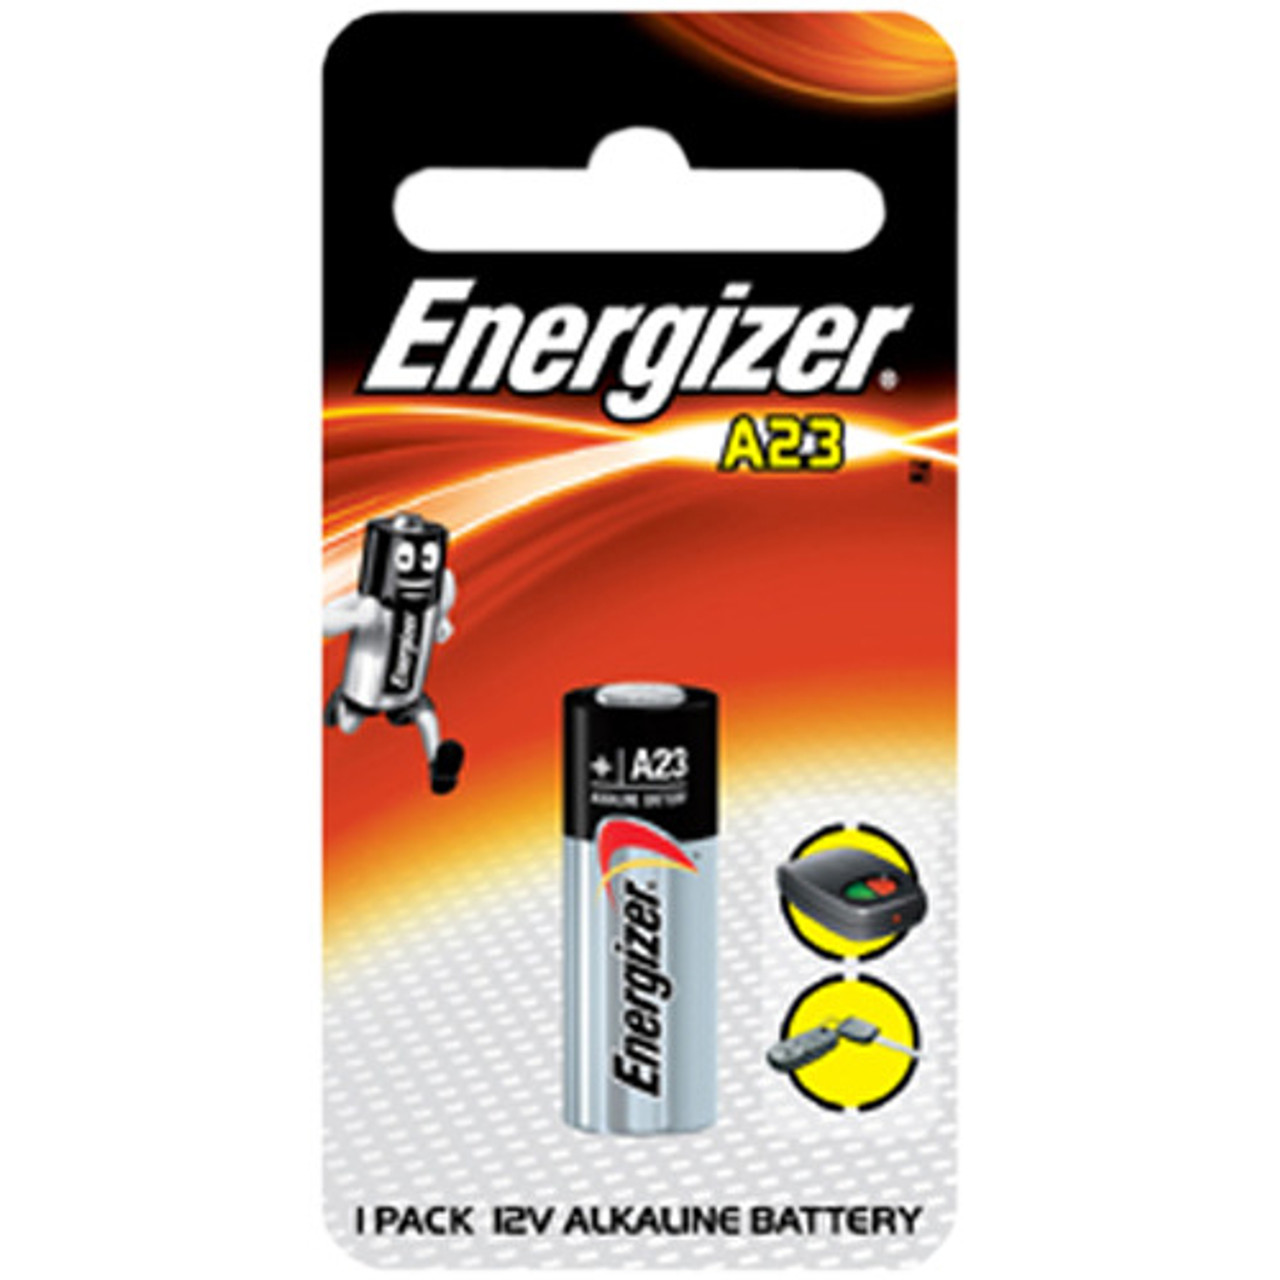 A23 Alkaline 12 Volt Battery 50 Pack + FREE SHIPPING! - Brooklyn Battery  Works